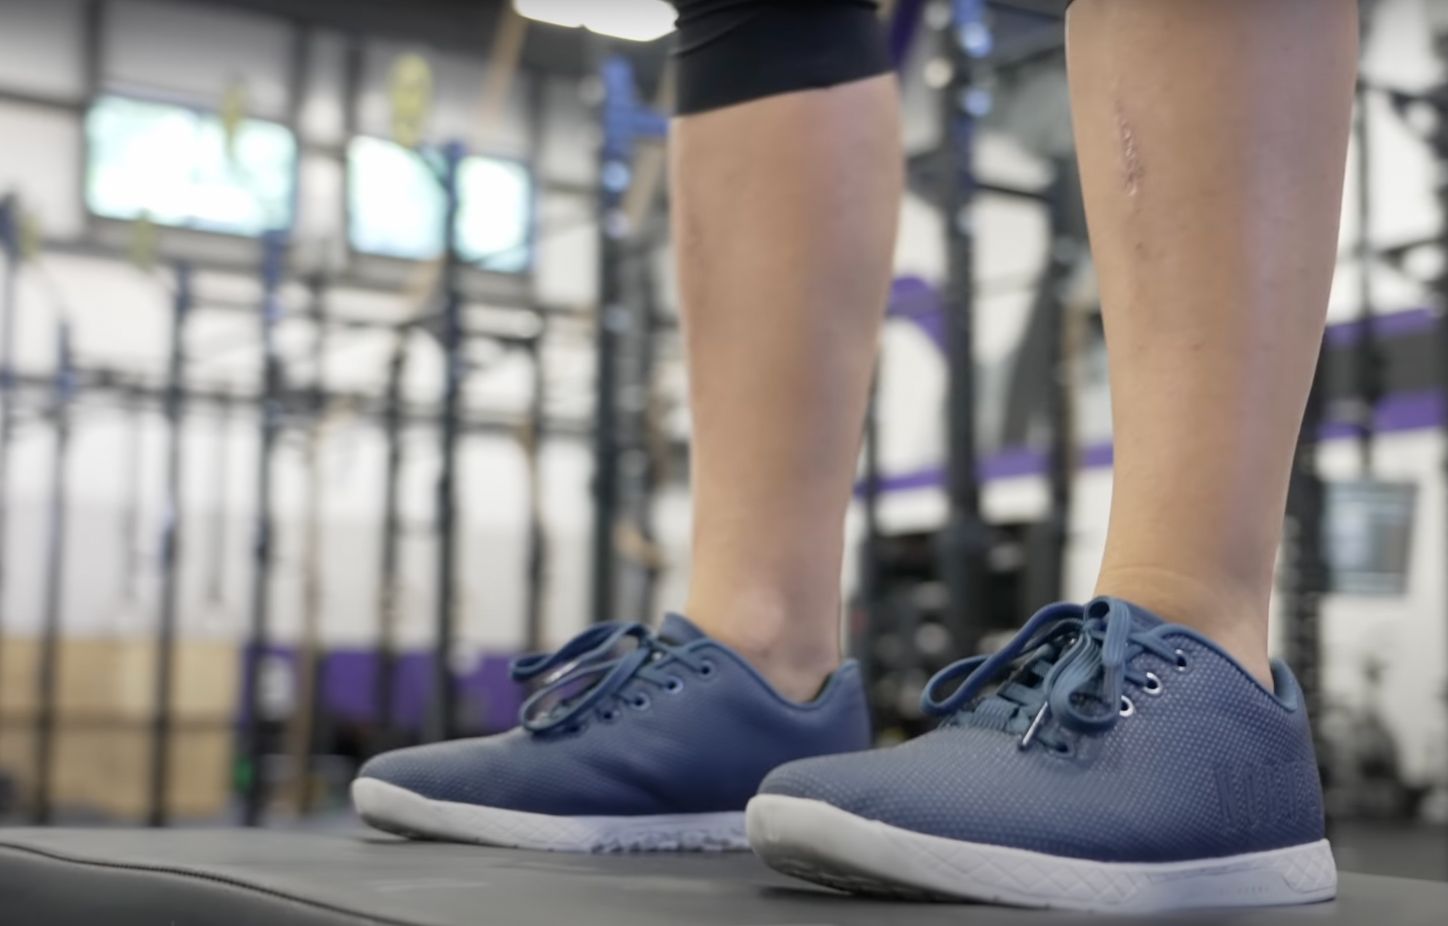 kate wearing the nobull trainer at the gym